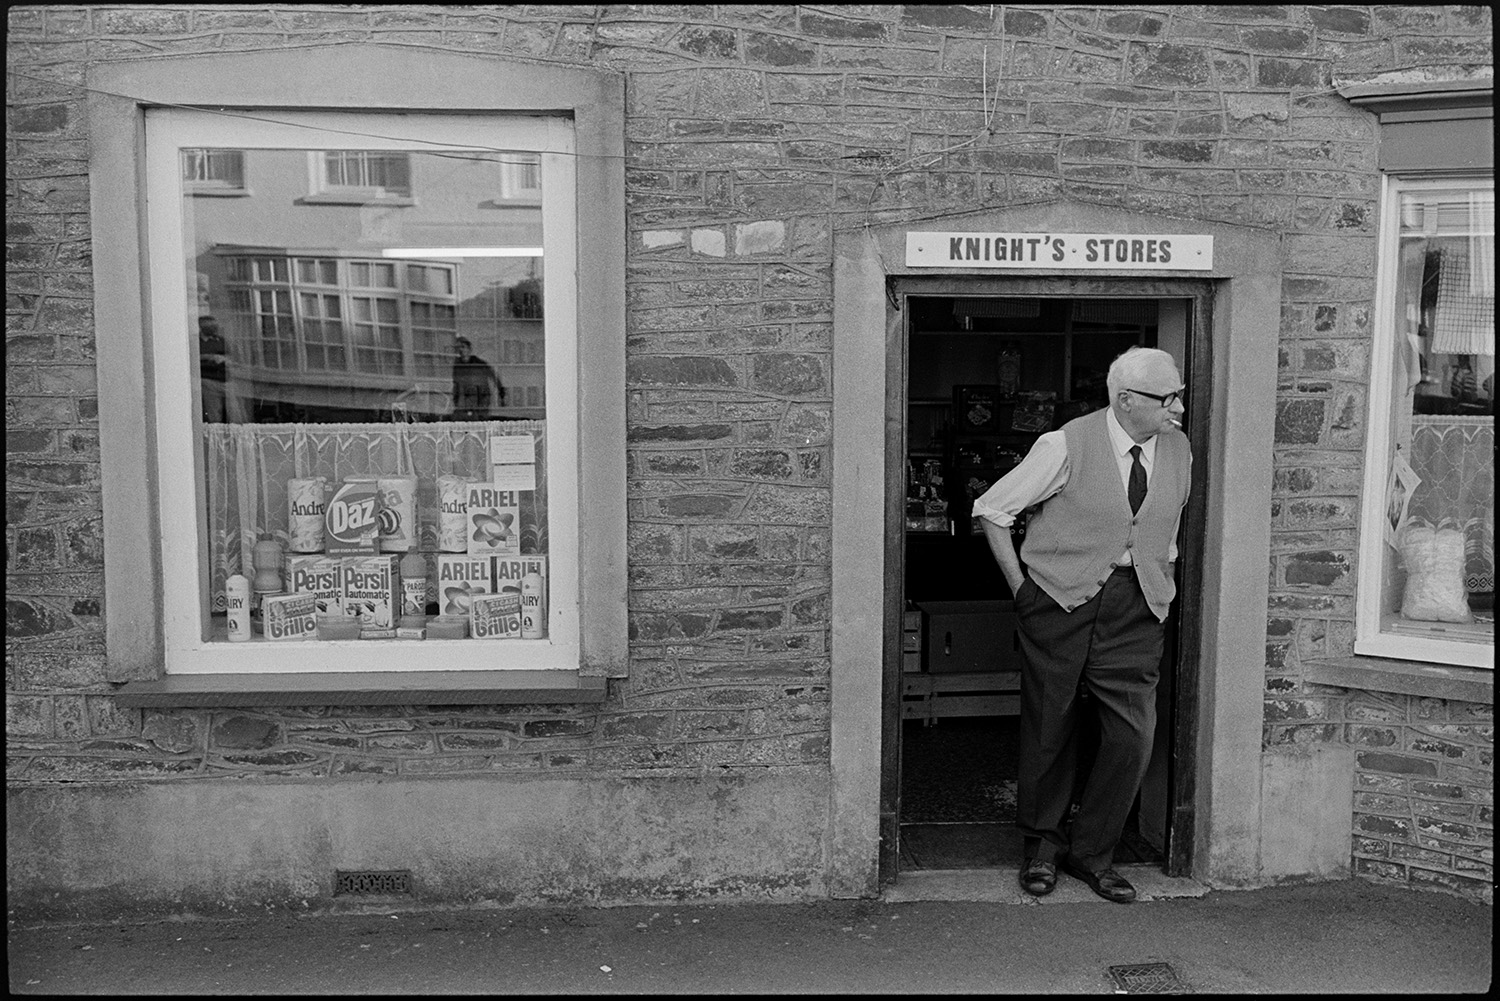 Village fair, shopkeeper at shop door watching fair. 
[Bill Knight watching Chulmleigh Fair from his shop doorway of Knight's Stores. He is smoking a cigarette. Boxes of Persil, Daz and Ariel washing powder are on display in the shop window.]